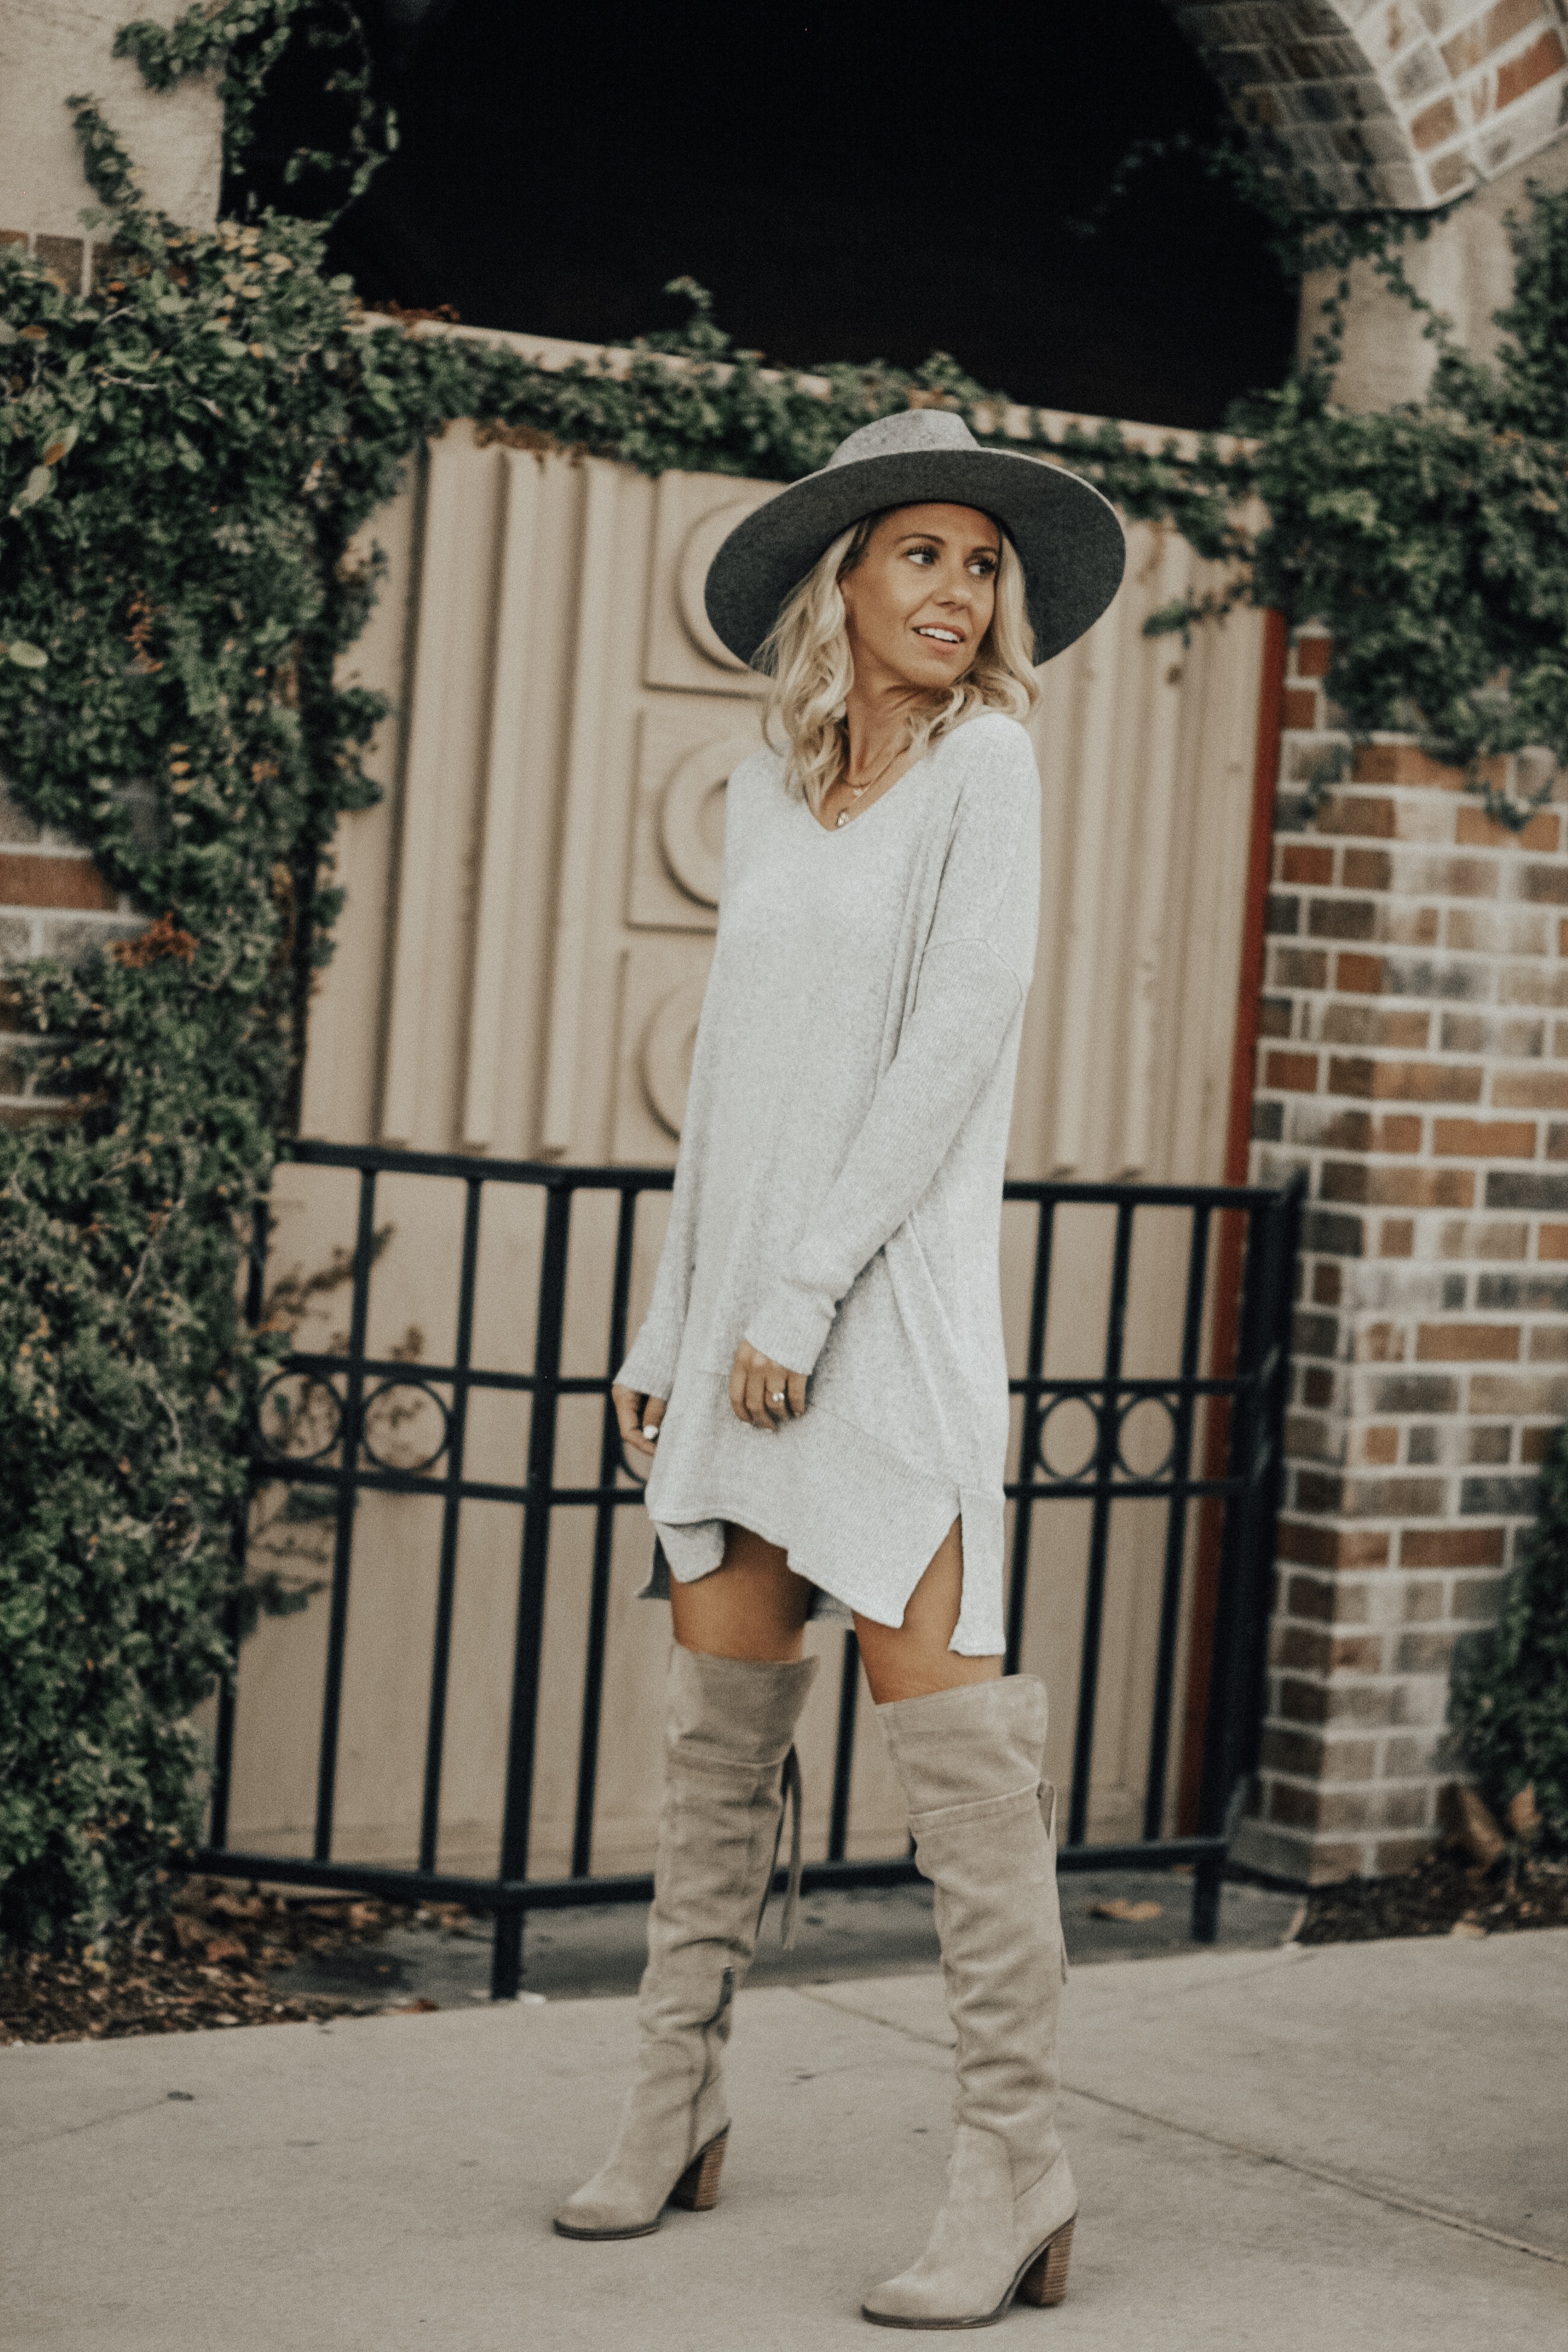 BLACK FRIDAY & CYBER MONDAY SALES- Jaclyn De Leon Style + online shopping + thanksgiving + daily deals + sale alert + target + american eagle + abercrombie + express + nordstrom + OTK boots + sweater dress + street style + fall outfit inspiration + holiday look + christmas shopping + gift giving + sale alert